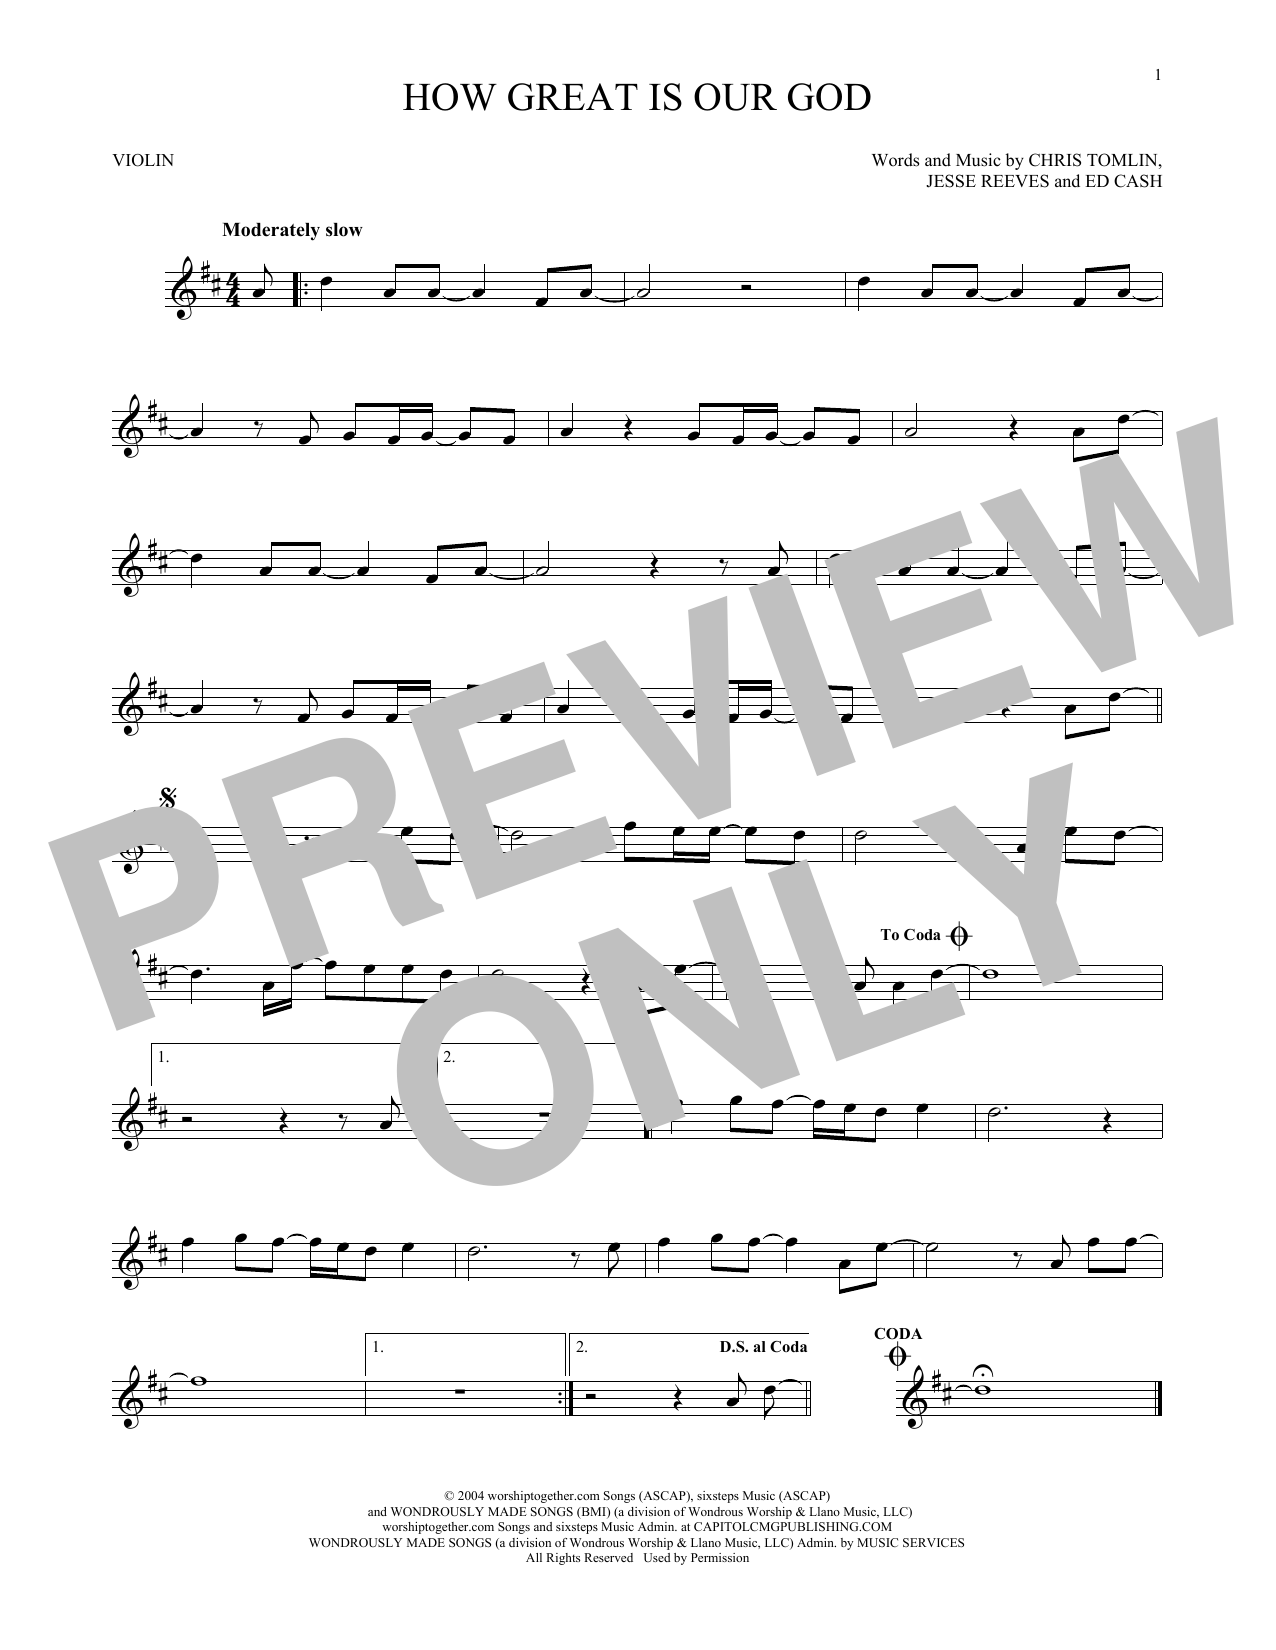 Chris Tomlin How Great Is Our God sheet music notes printable PDF score